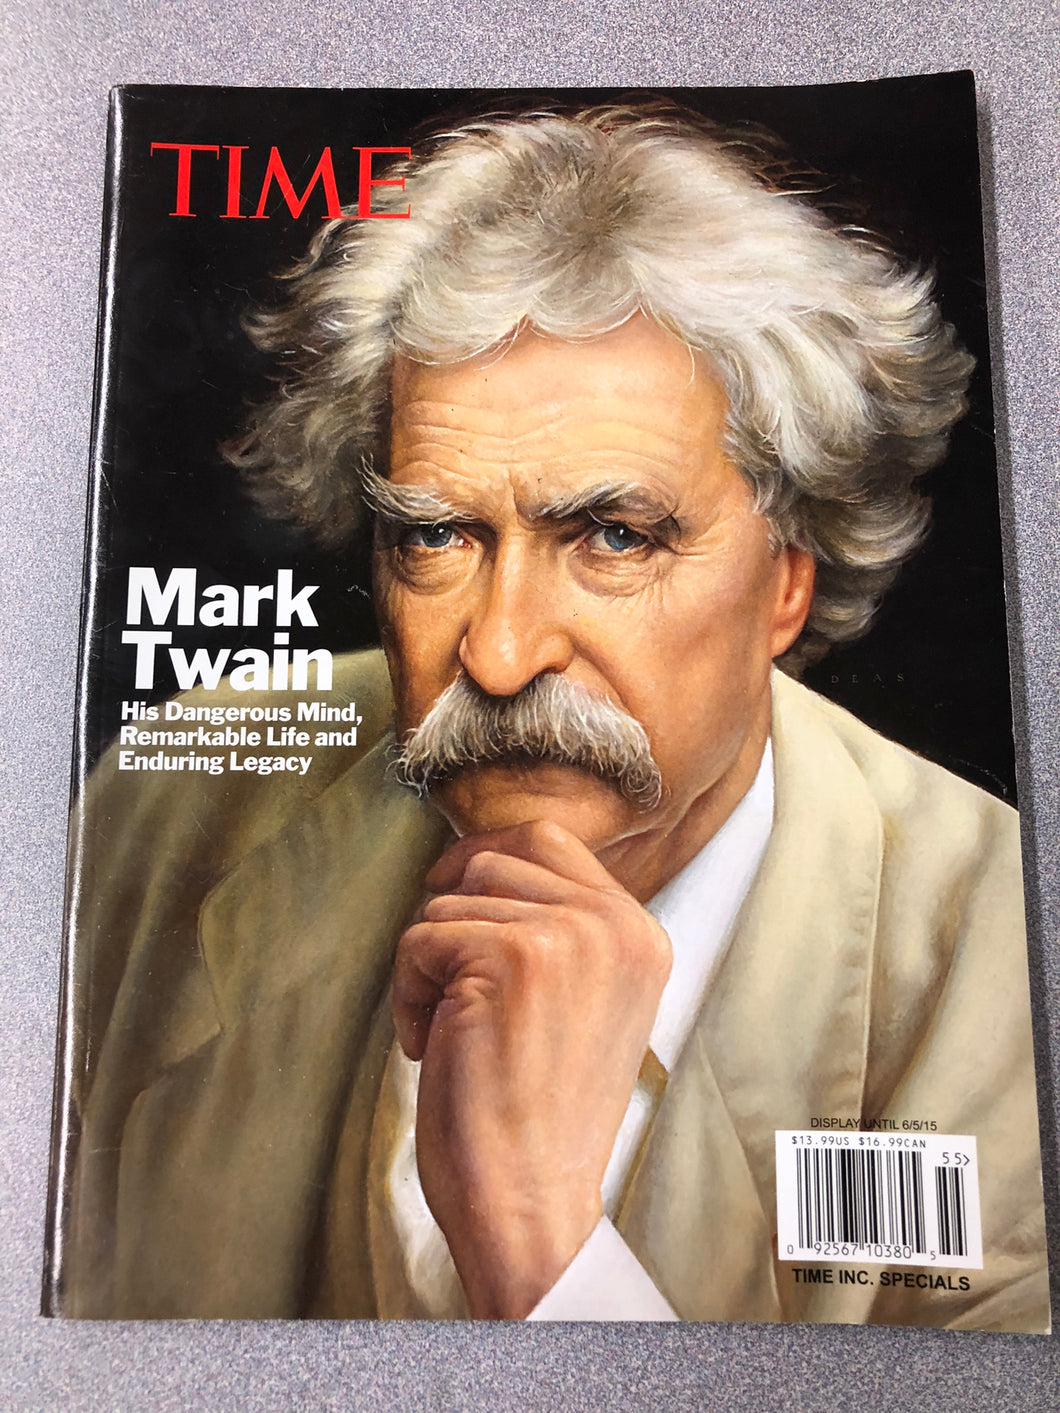 Mark Twain: His Dangerous Mind, Remarkable Life and Enduring Legacy, Knauer, Kelly, ed. [2015] BI 9/22